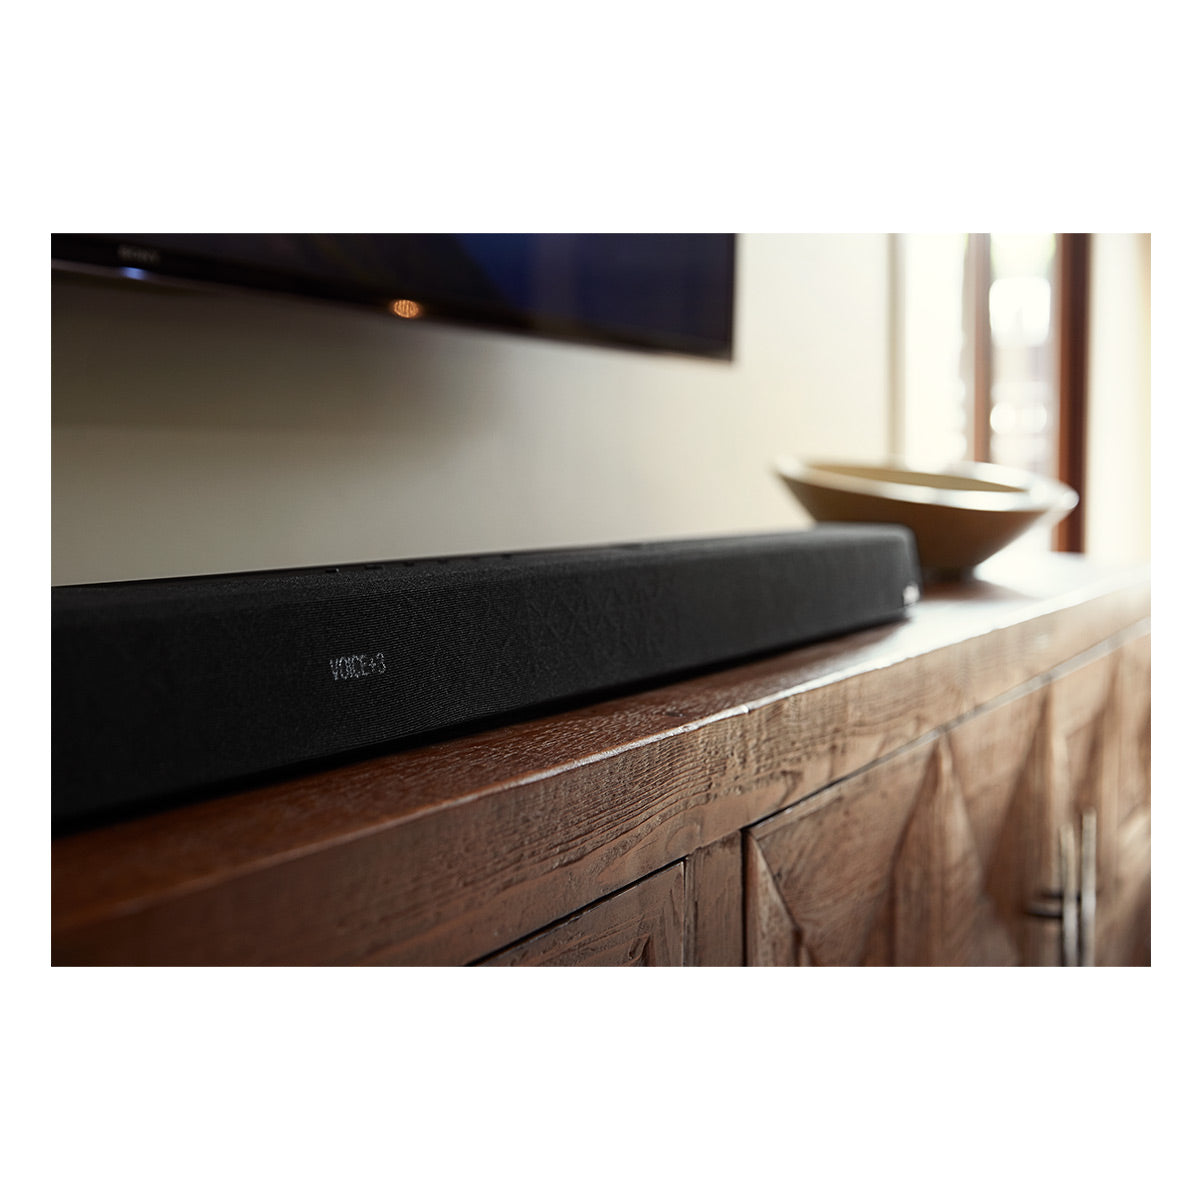 Polk Audio MagniFi Max AX SR 7.1.2 Channel Soundbar System with Dolby Atmos/DTS:X, Wireless Surround Speakers, and 10" Subwoofer